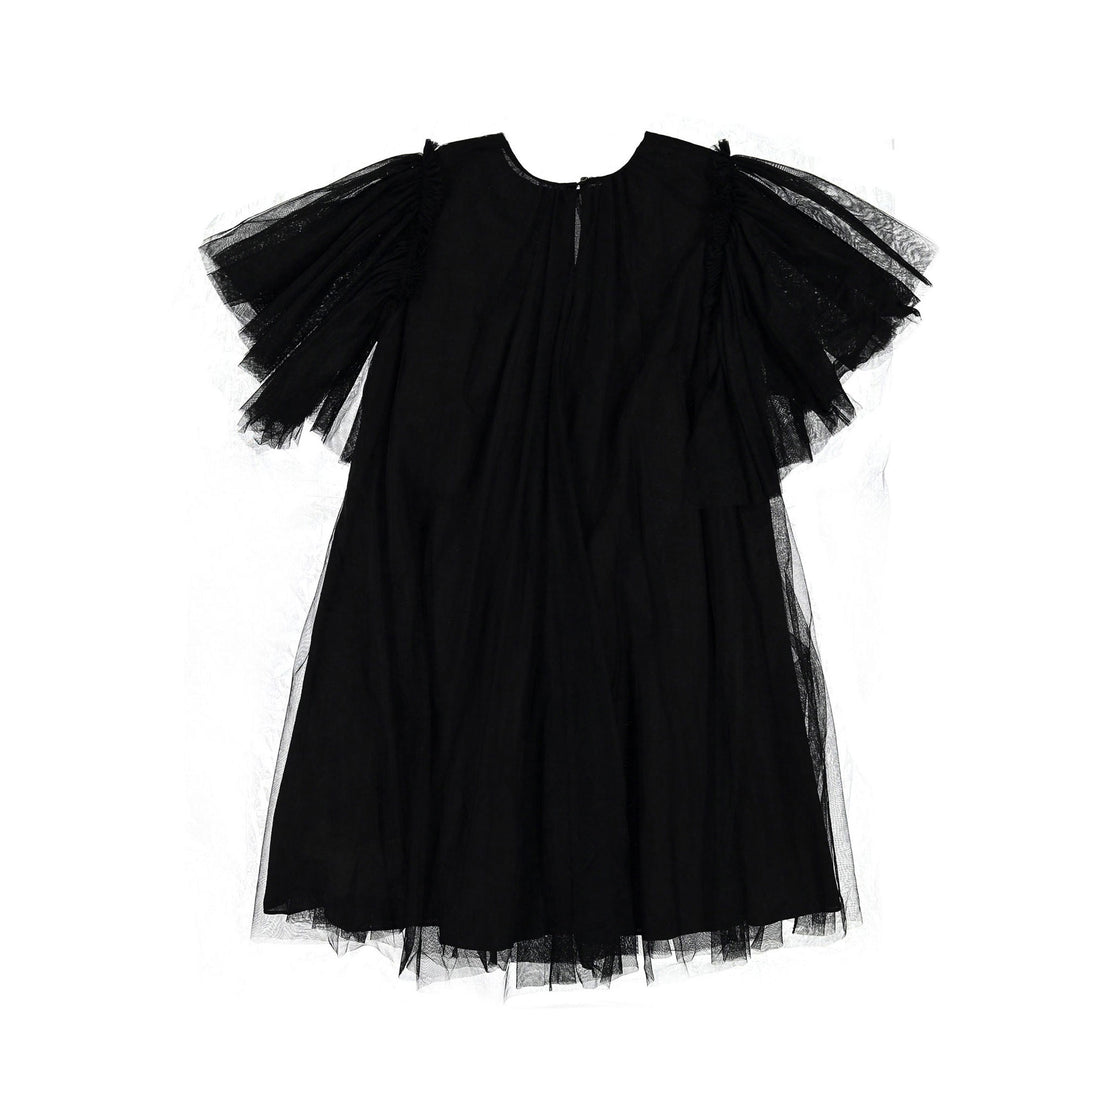 JNBY Black Tulle Party Dress